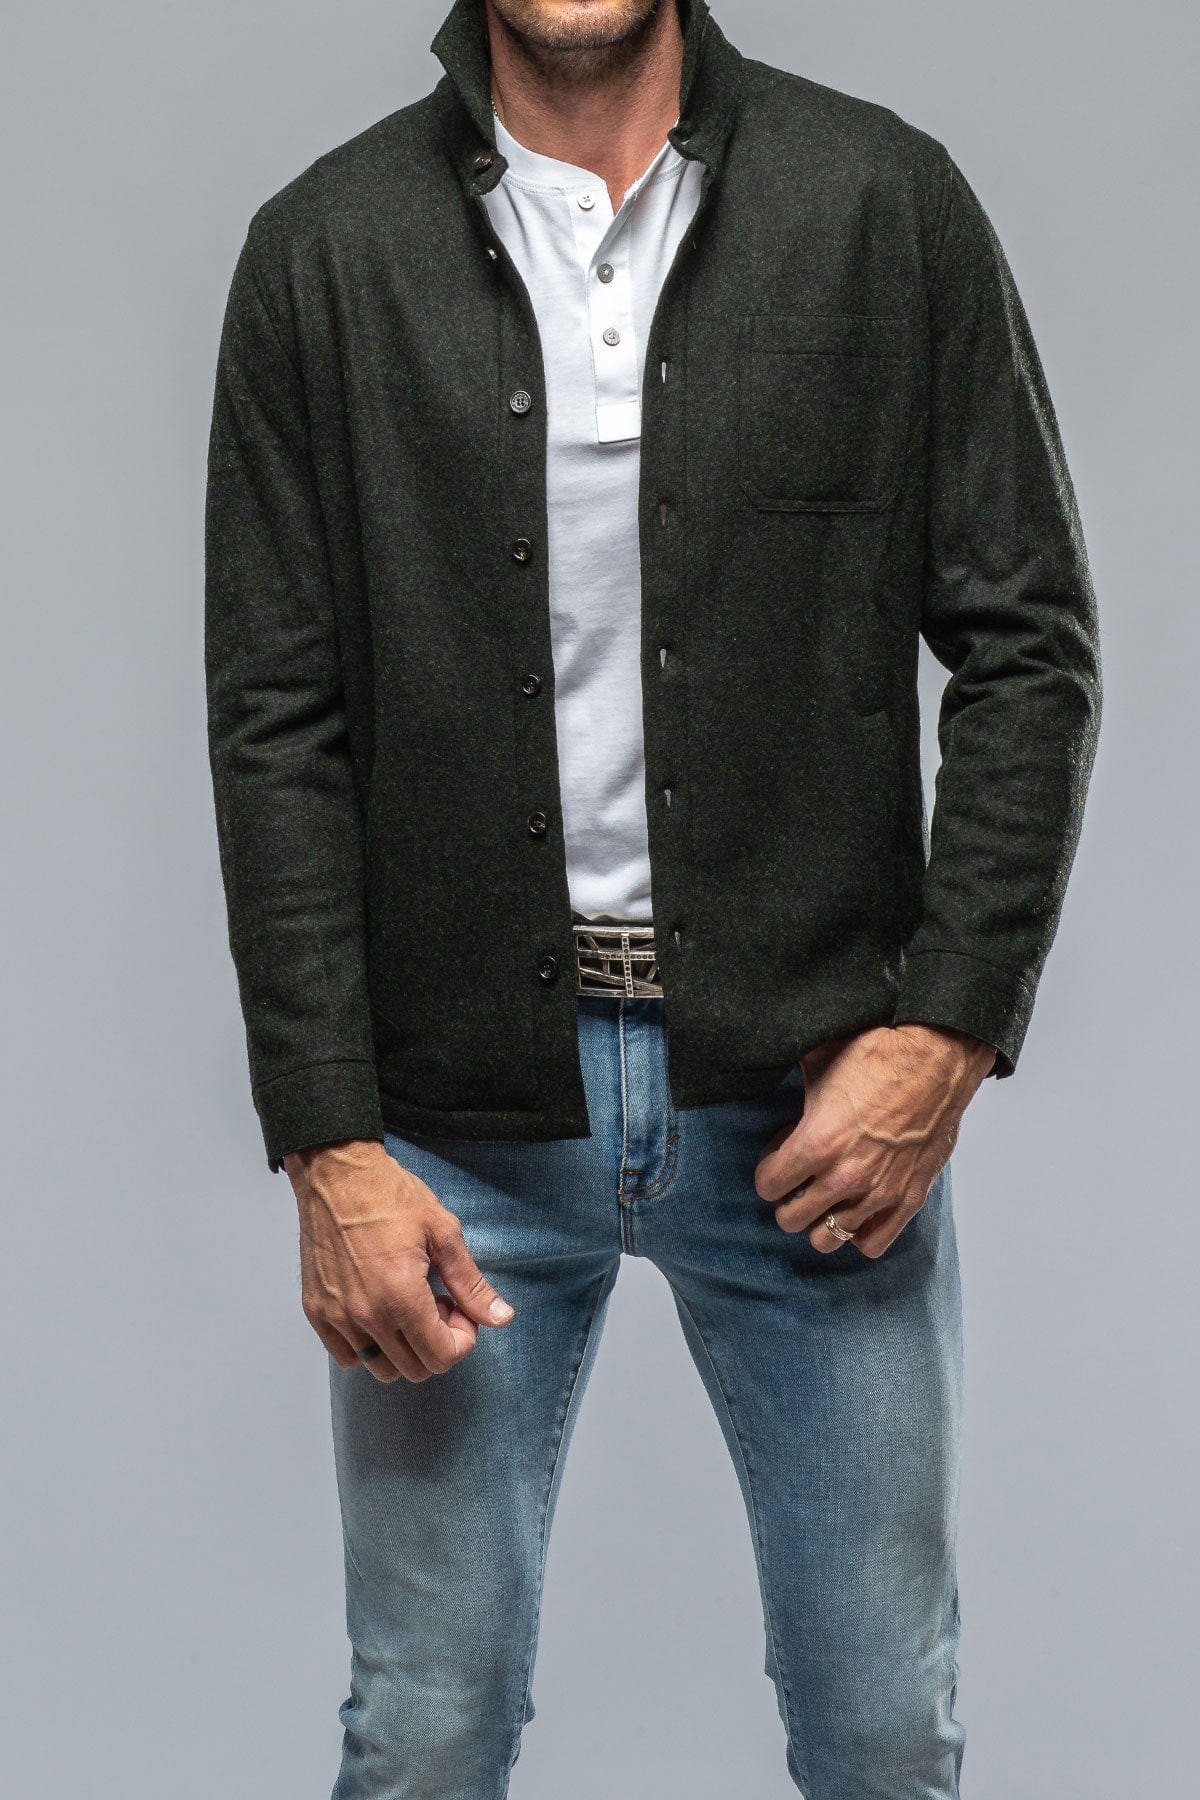 Sooter Cashmere Overshirt in Green - AXEL'S